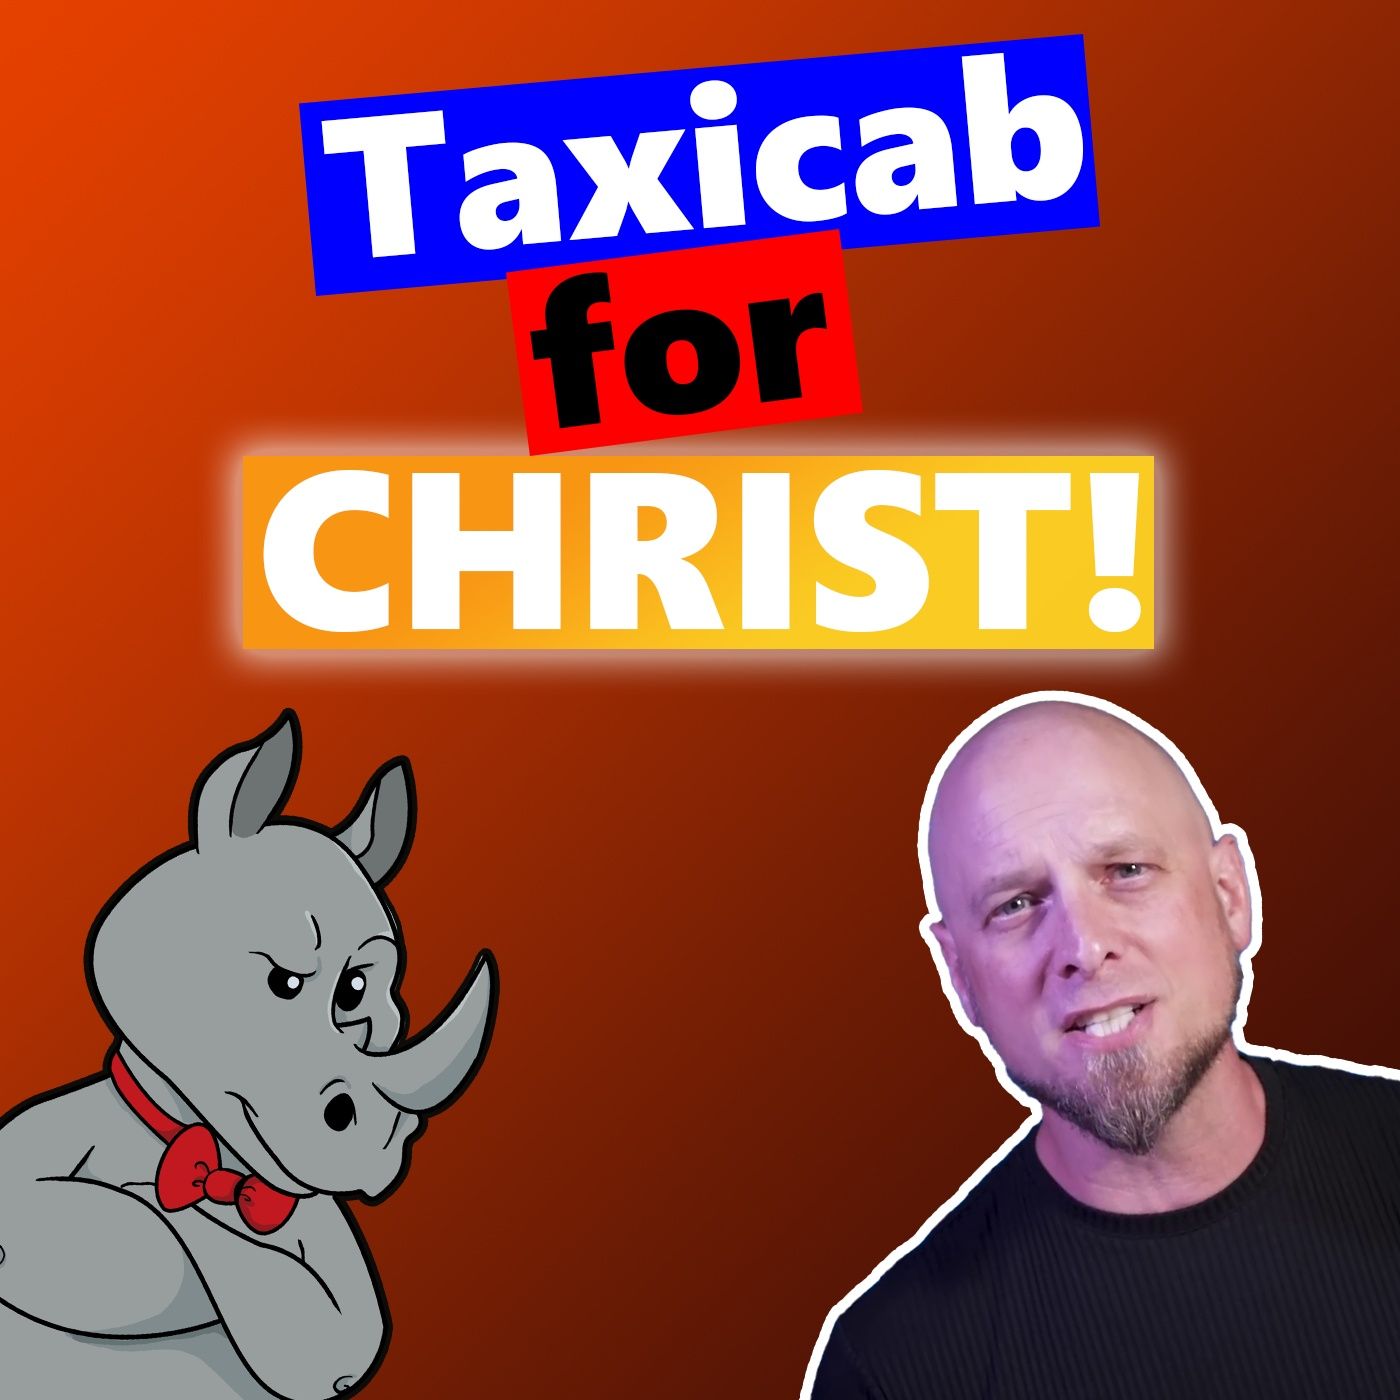 Taxicab Arguments for God!